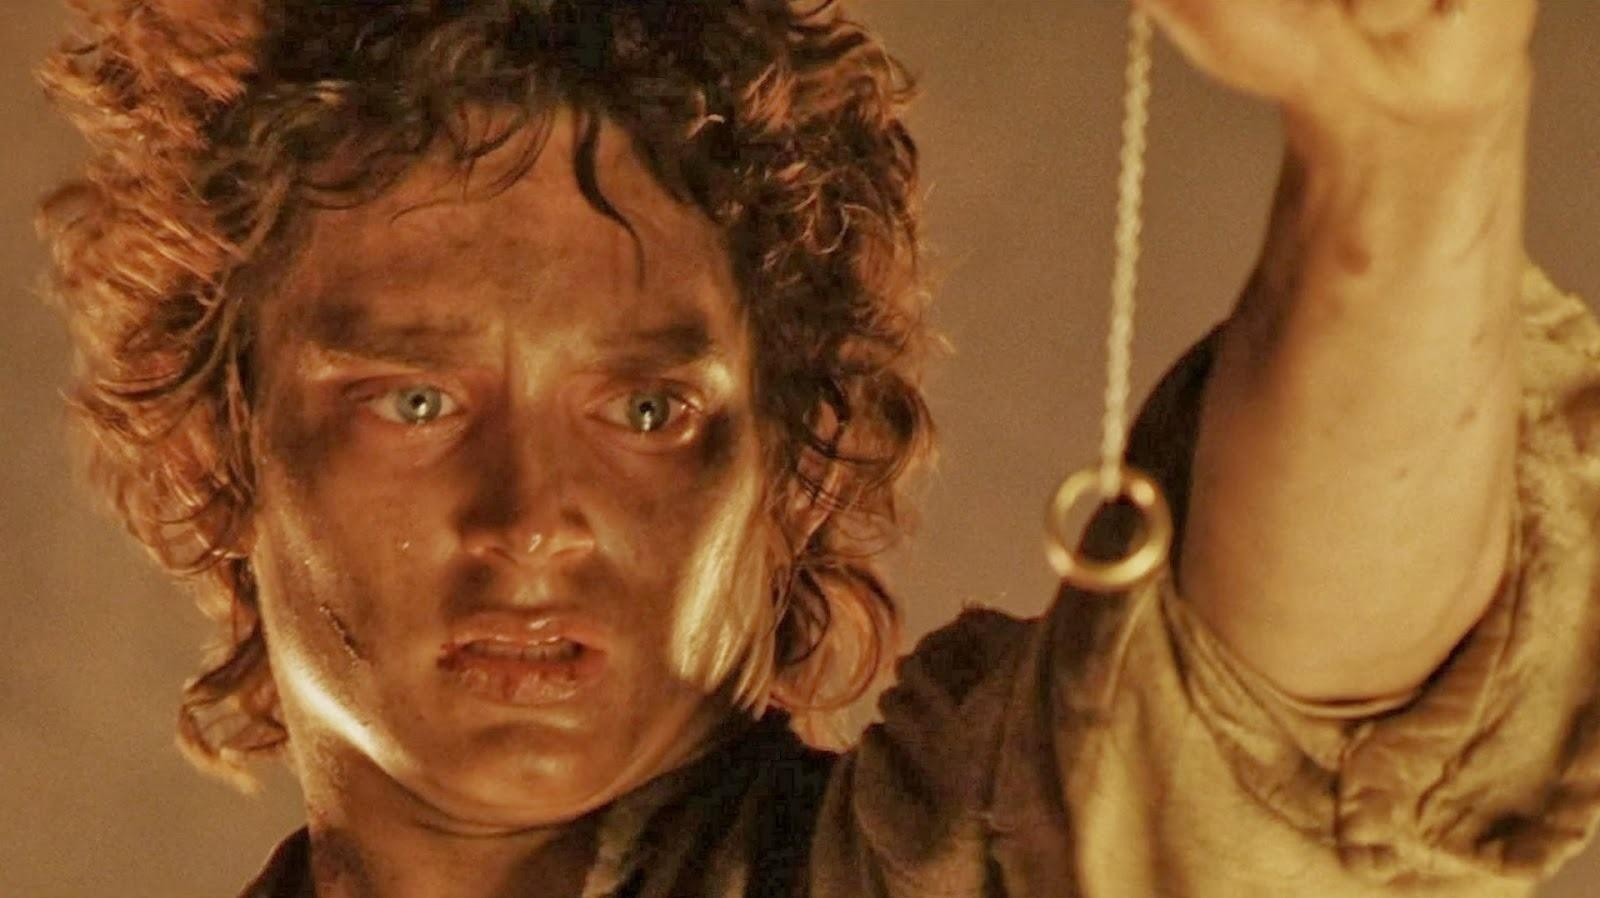 Lord of the Rings' ring was made by a jeweler who died just before release  - Polygon